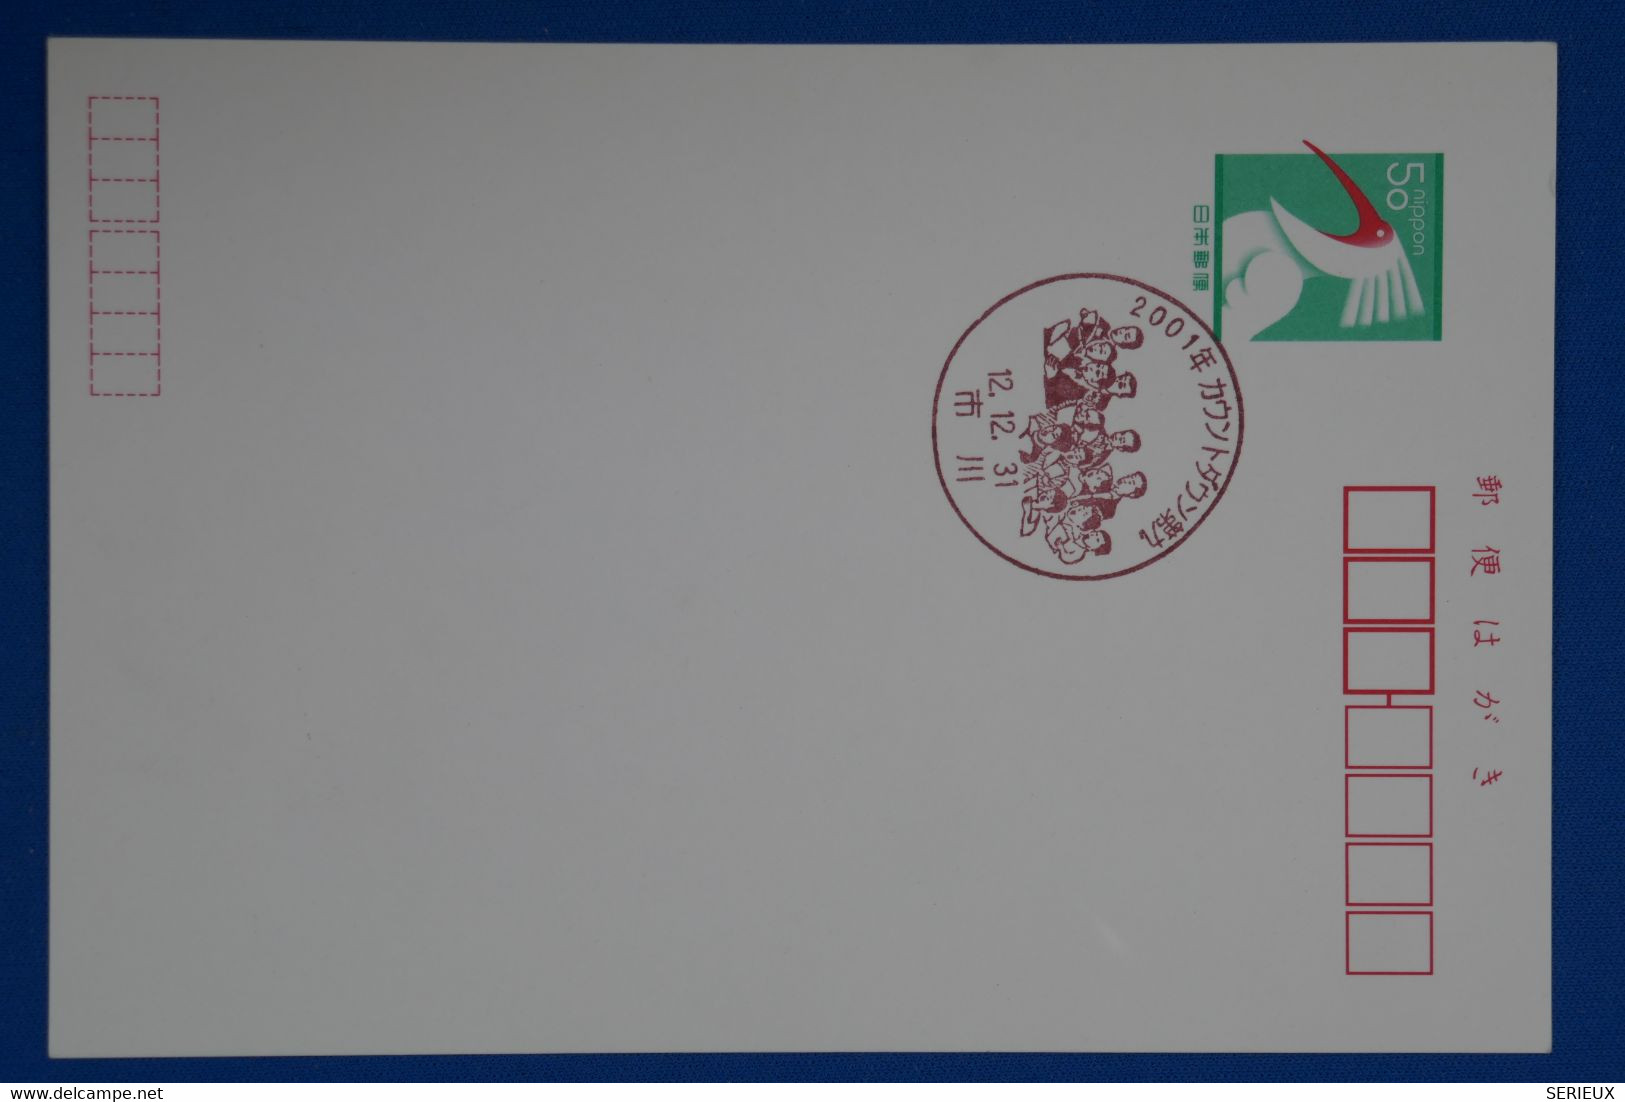 S15 JAPAN BELLE CARTE 1980 FIRST DAY COVER  + AFFRANCHISSEMENT PLAISANT - Covers & Documents